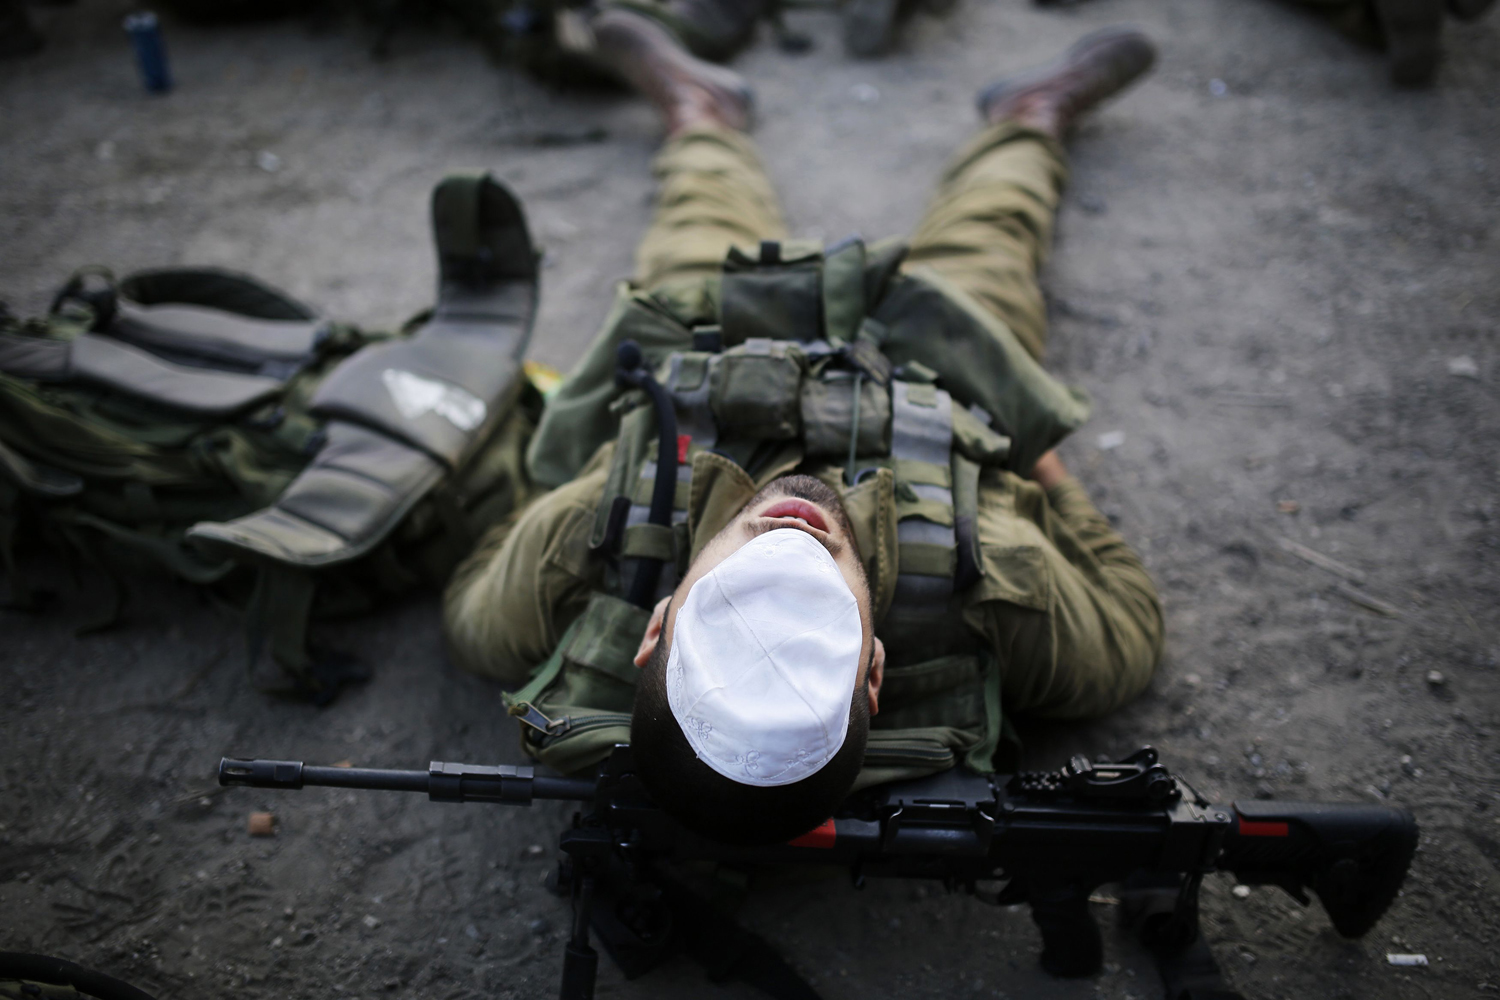 June 27, 2013. An Israeli soldier of the paratrooper brigade covers his face with a kippah, or skullcap, as he takes a break during a march near Jerusalem, marking the completion of their advanced training, at the end of which they receive a red paratrooper beret.